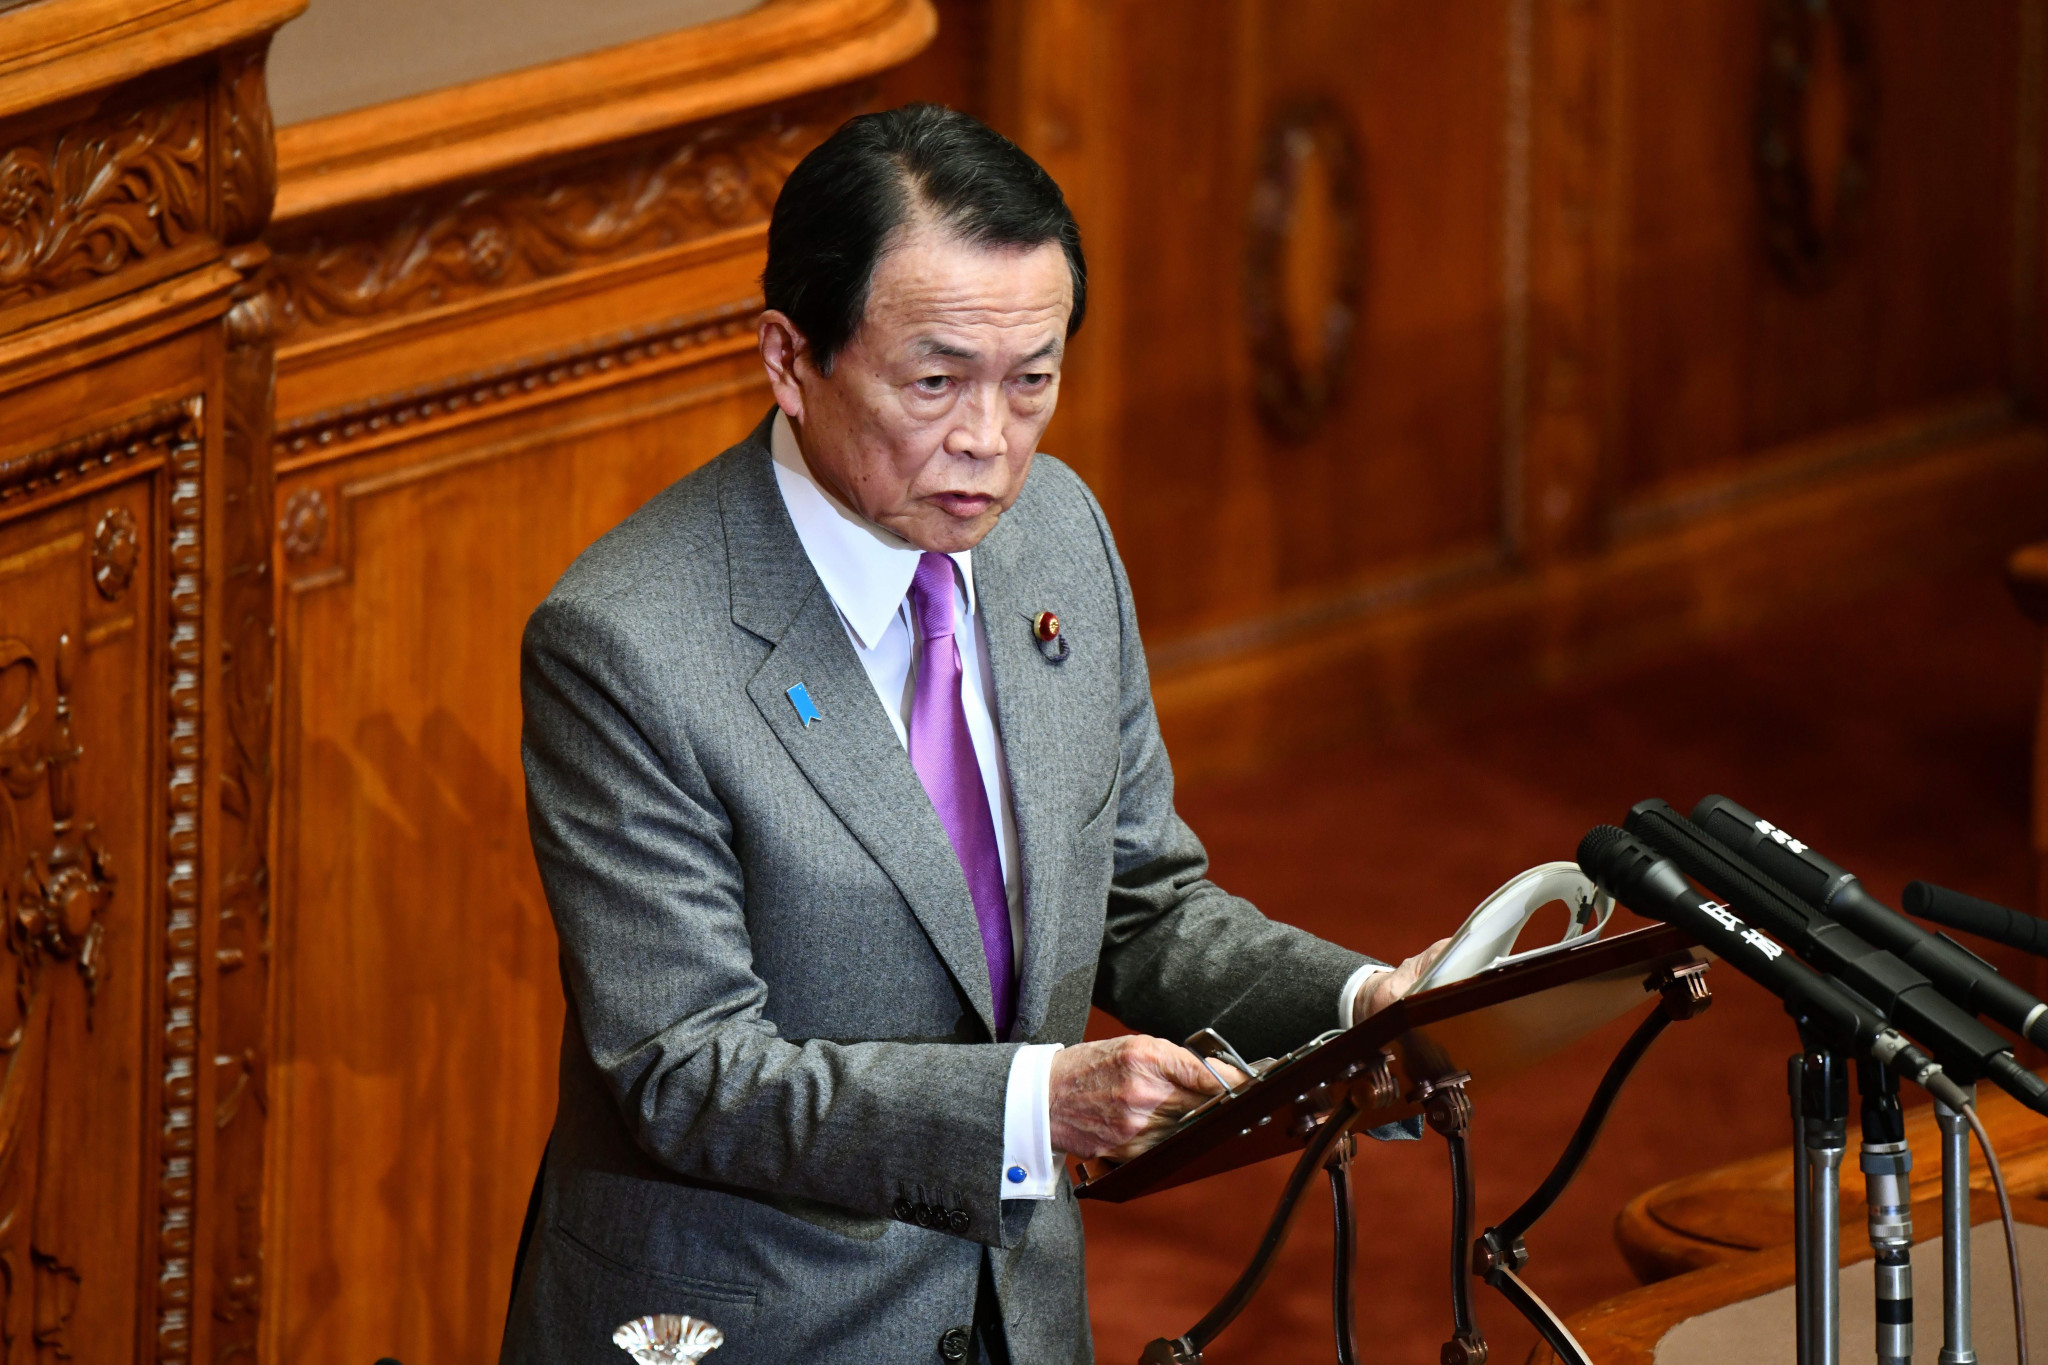 Japan's Deputy Prime Minister claims Olympics are "cursed"